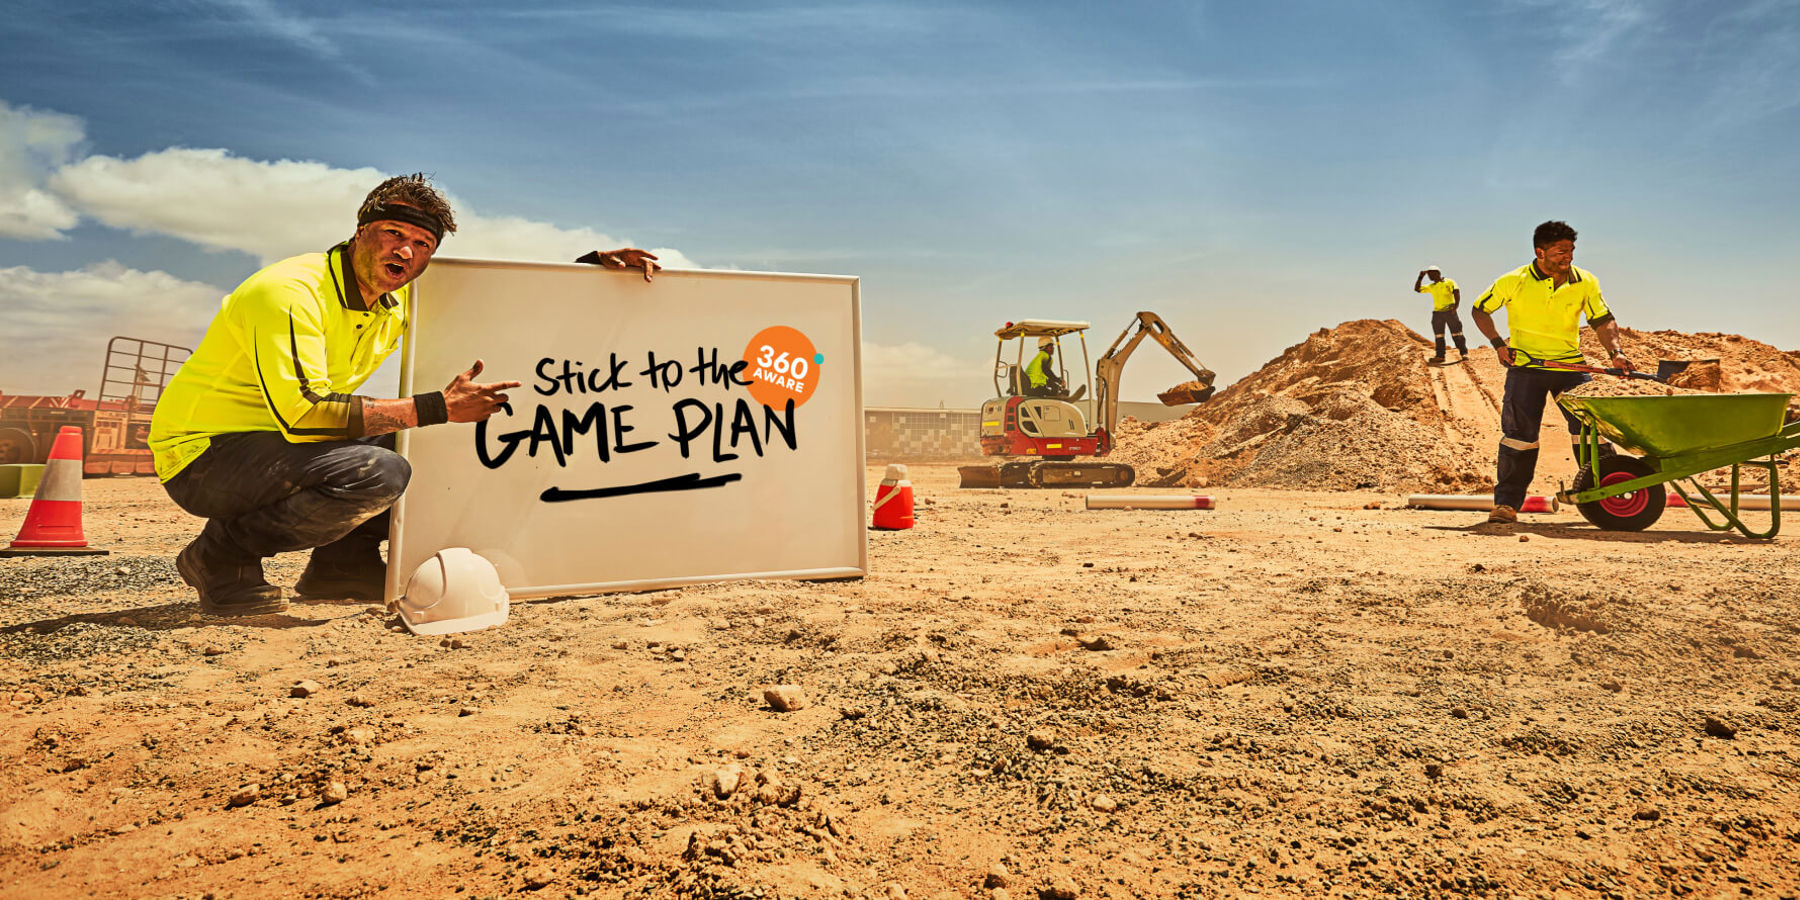 A construction worker on a building site holding a whiteboard with "Stick to the game plan" written on it.